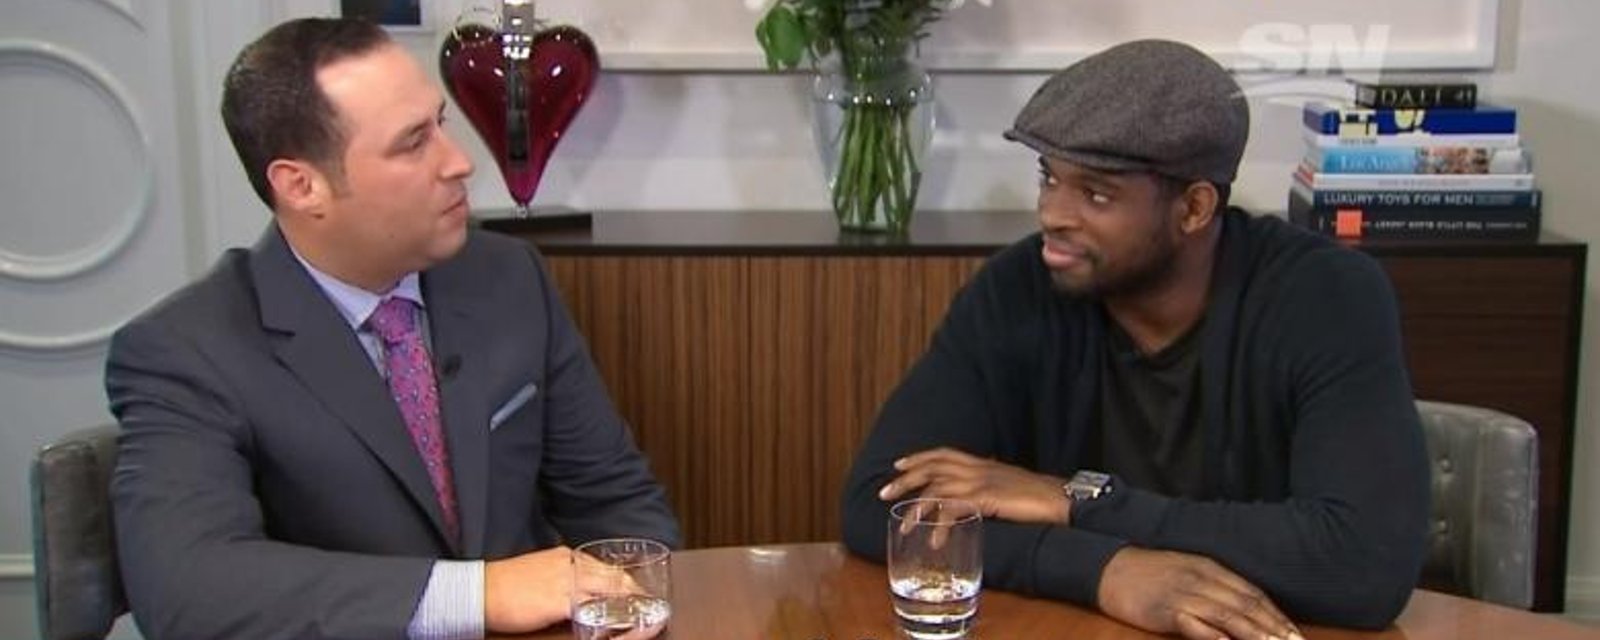 Video: Subban finally tells his side of the story in exclusive one on one interview.